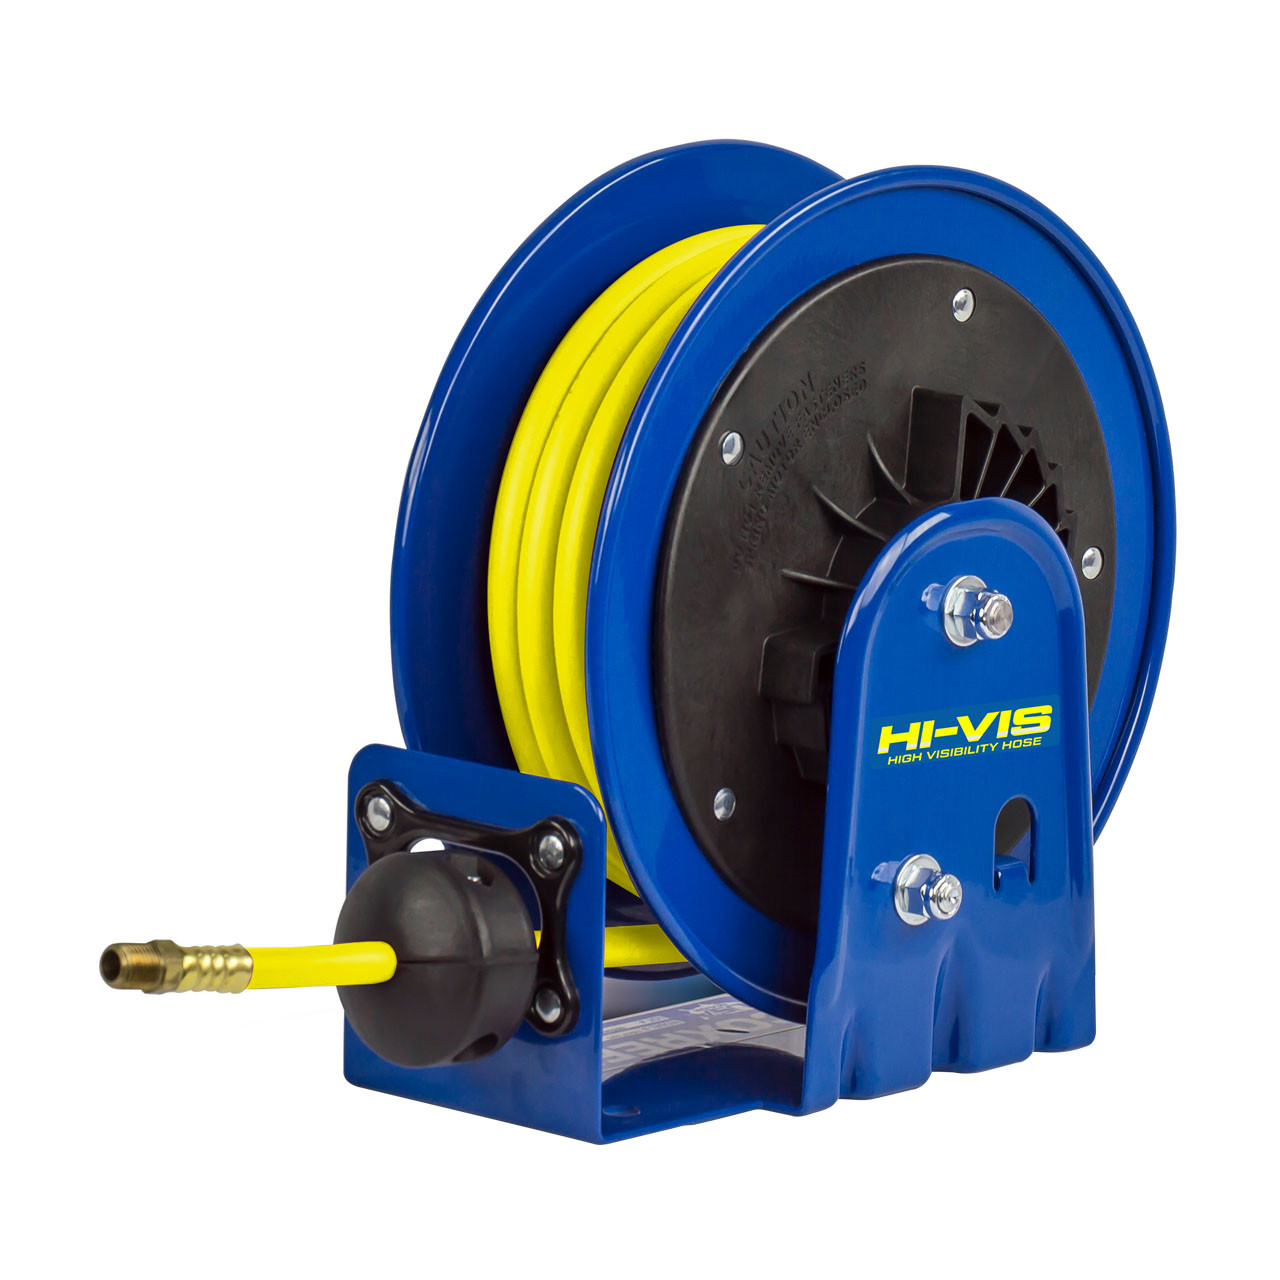 Coxreels LG Series Lightweight Air Hose Reel w/ High Visibility